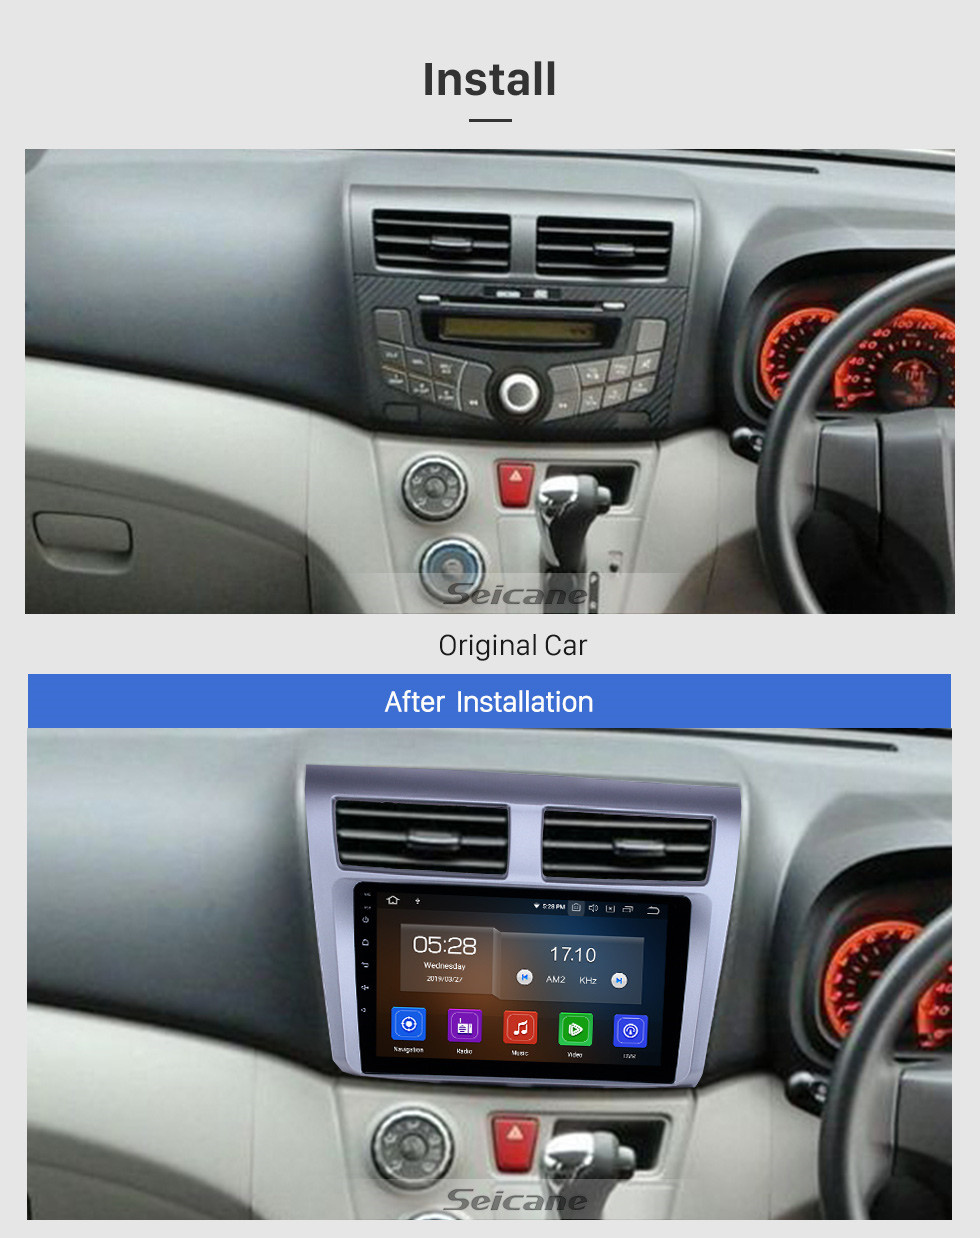 Seicane Android 11.0 9 inch GPS Navigation Radio for 2012-2014 Proton Myvi with HD Touchscreen Carplay Bluetooth Mirror Link support Digital TV